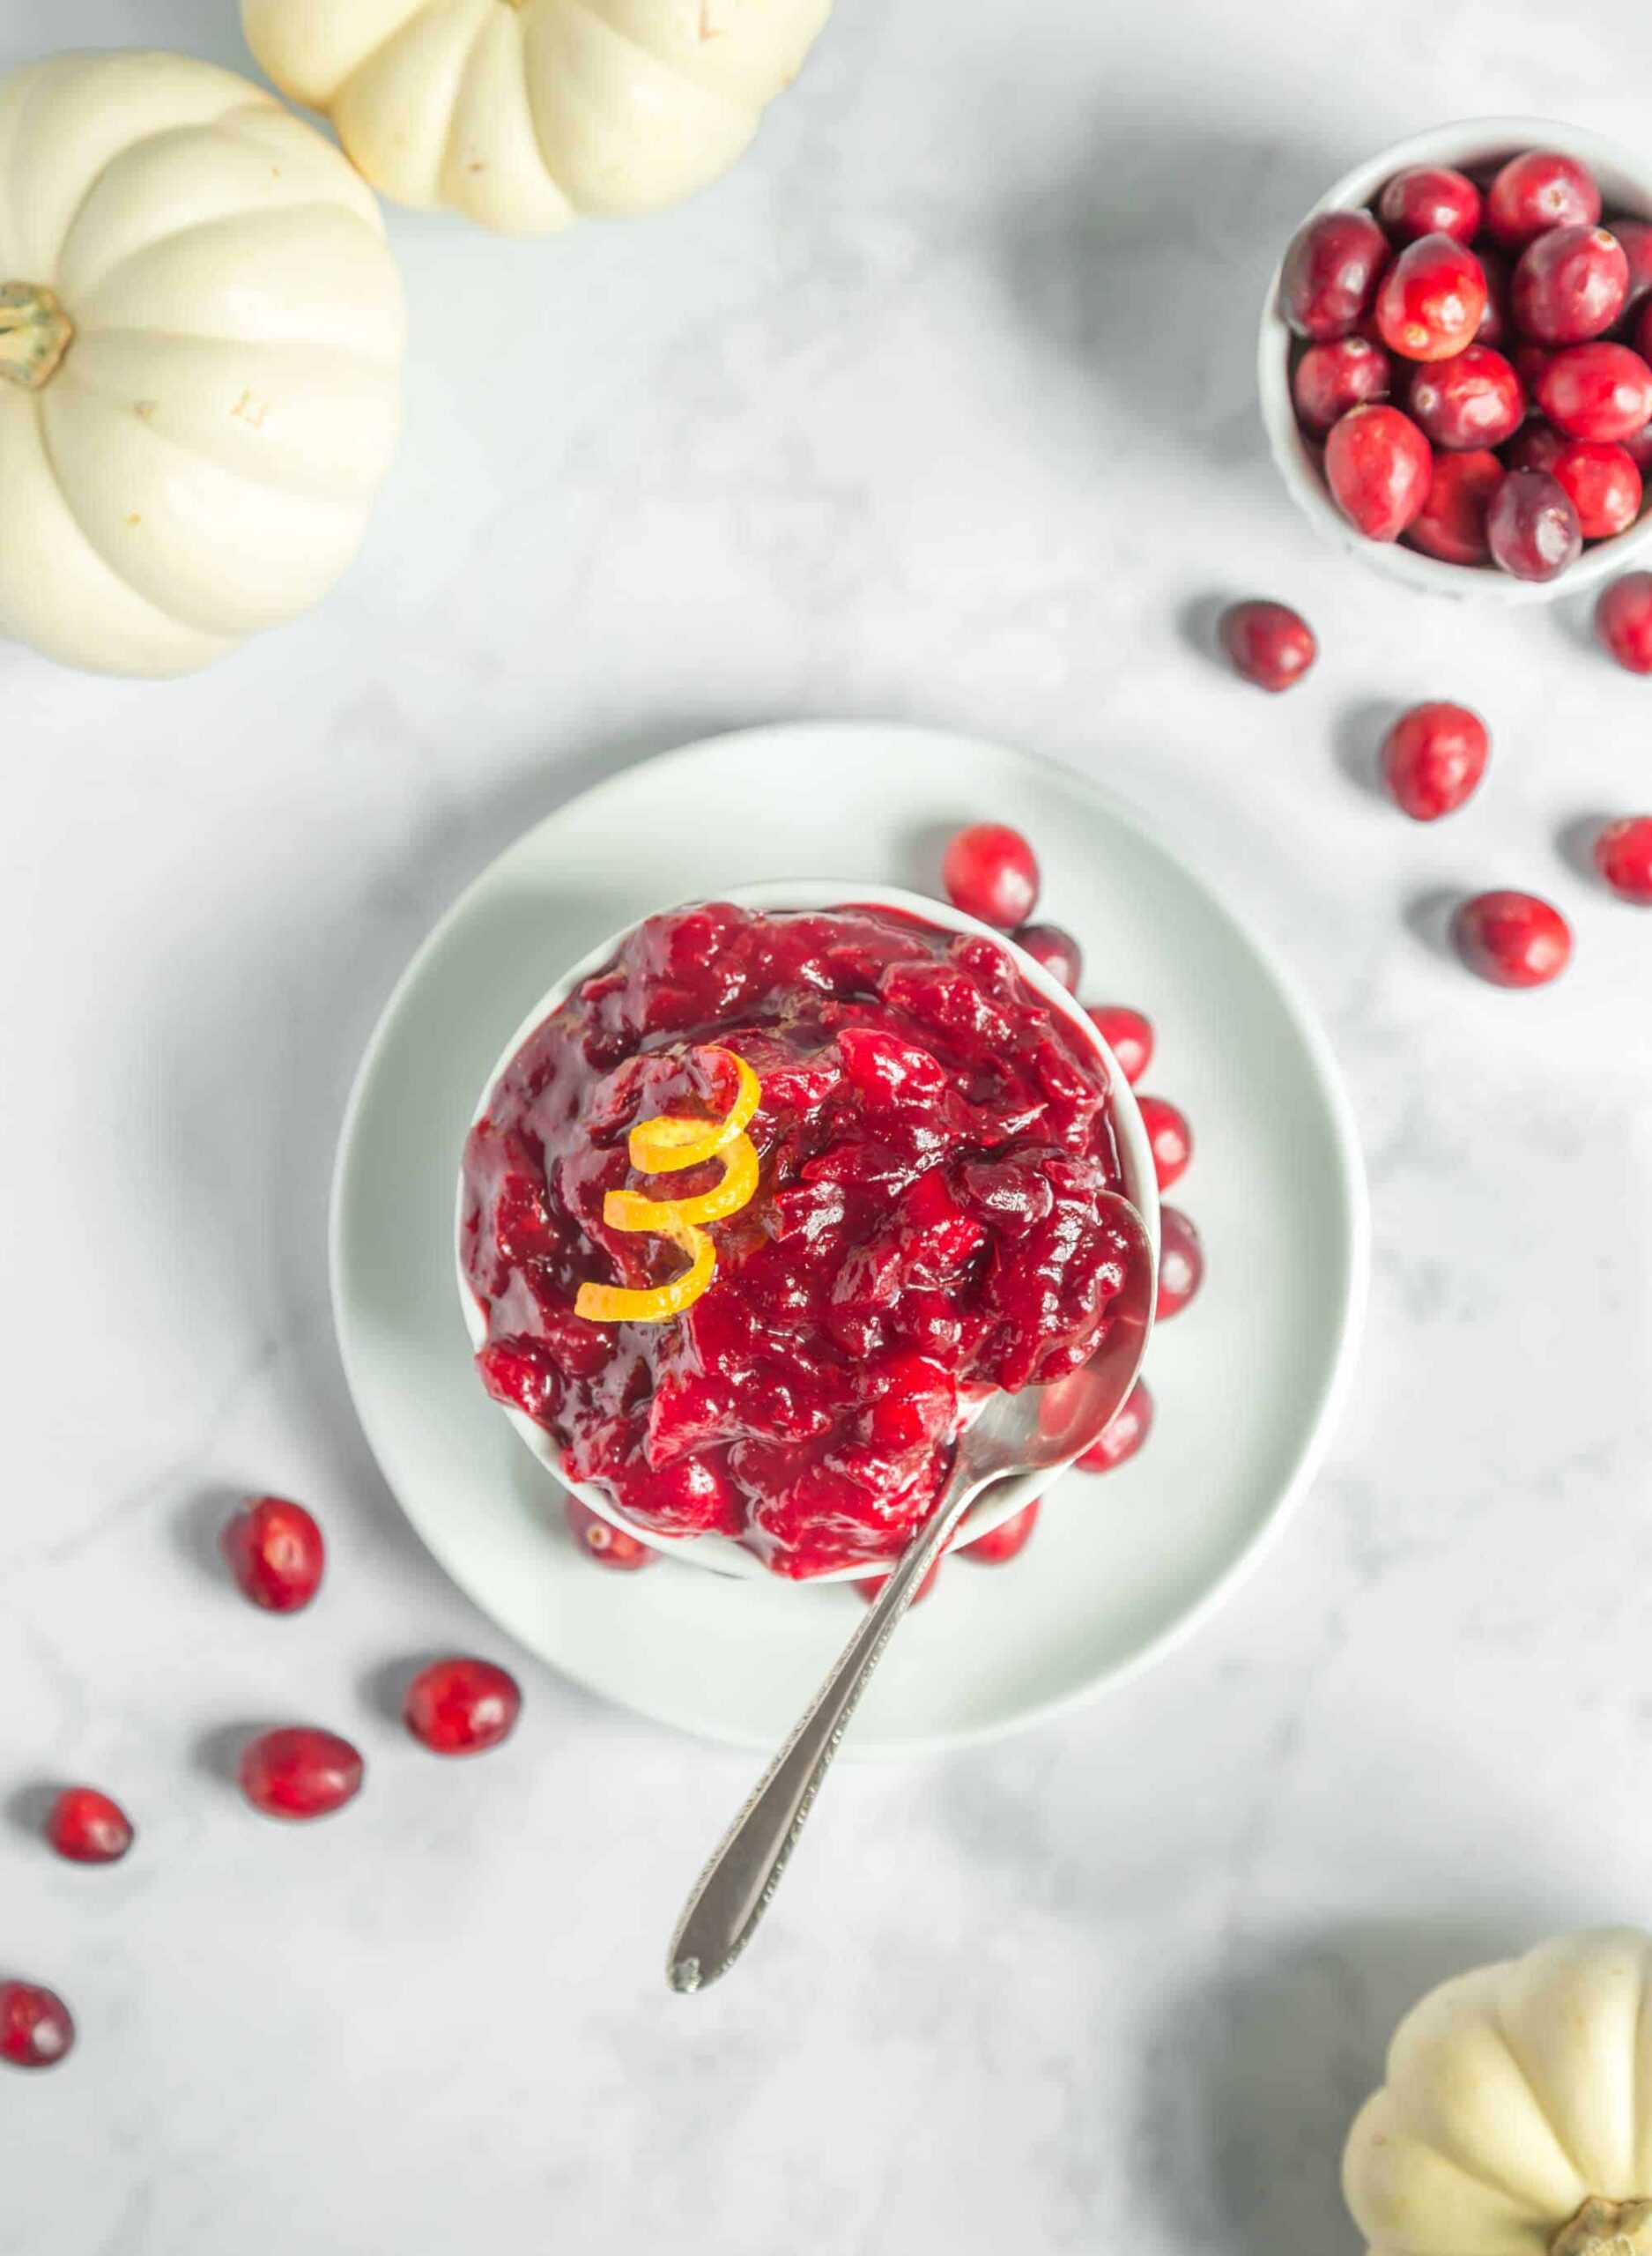 Easy Vegan Homemade Cranberry Sauce With Orange Juice and Agave